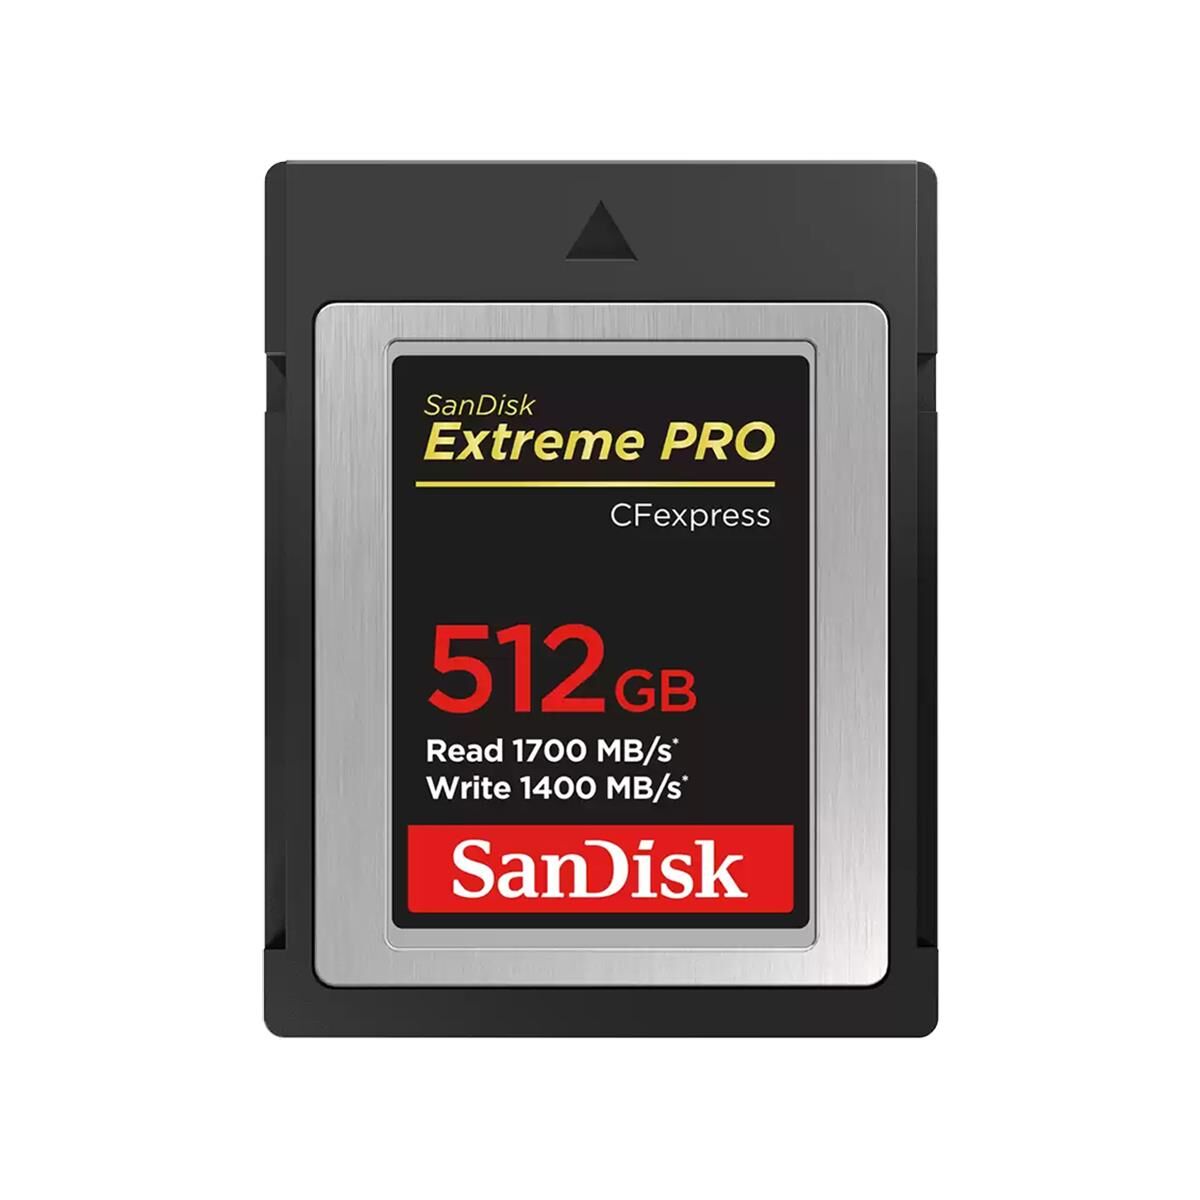 SanDisk Extreme PRO 512GB CFexpress Type-B Card, 1700MB/s Read, 1400MB/s Write